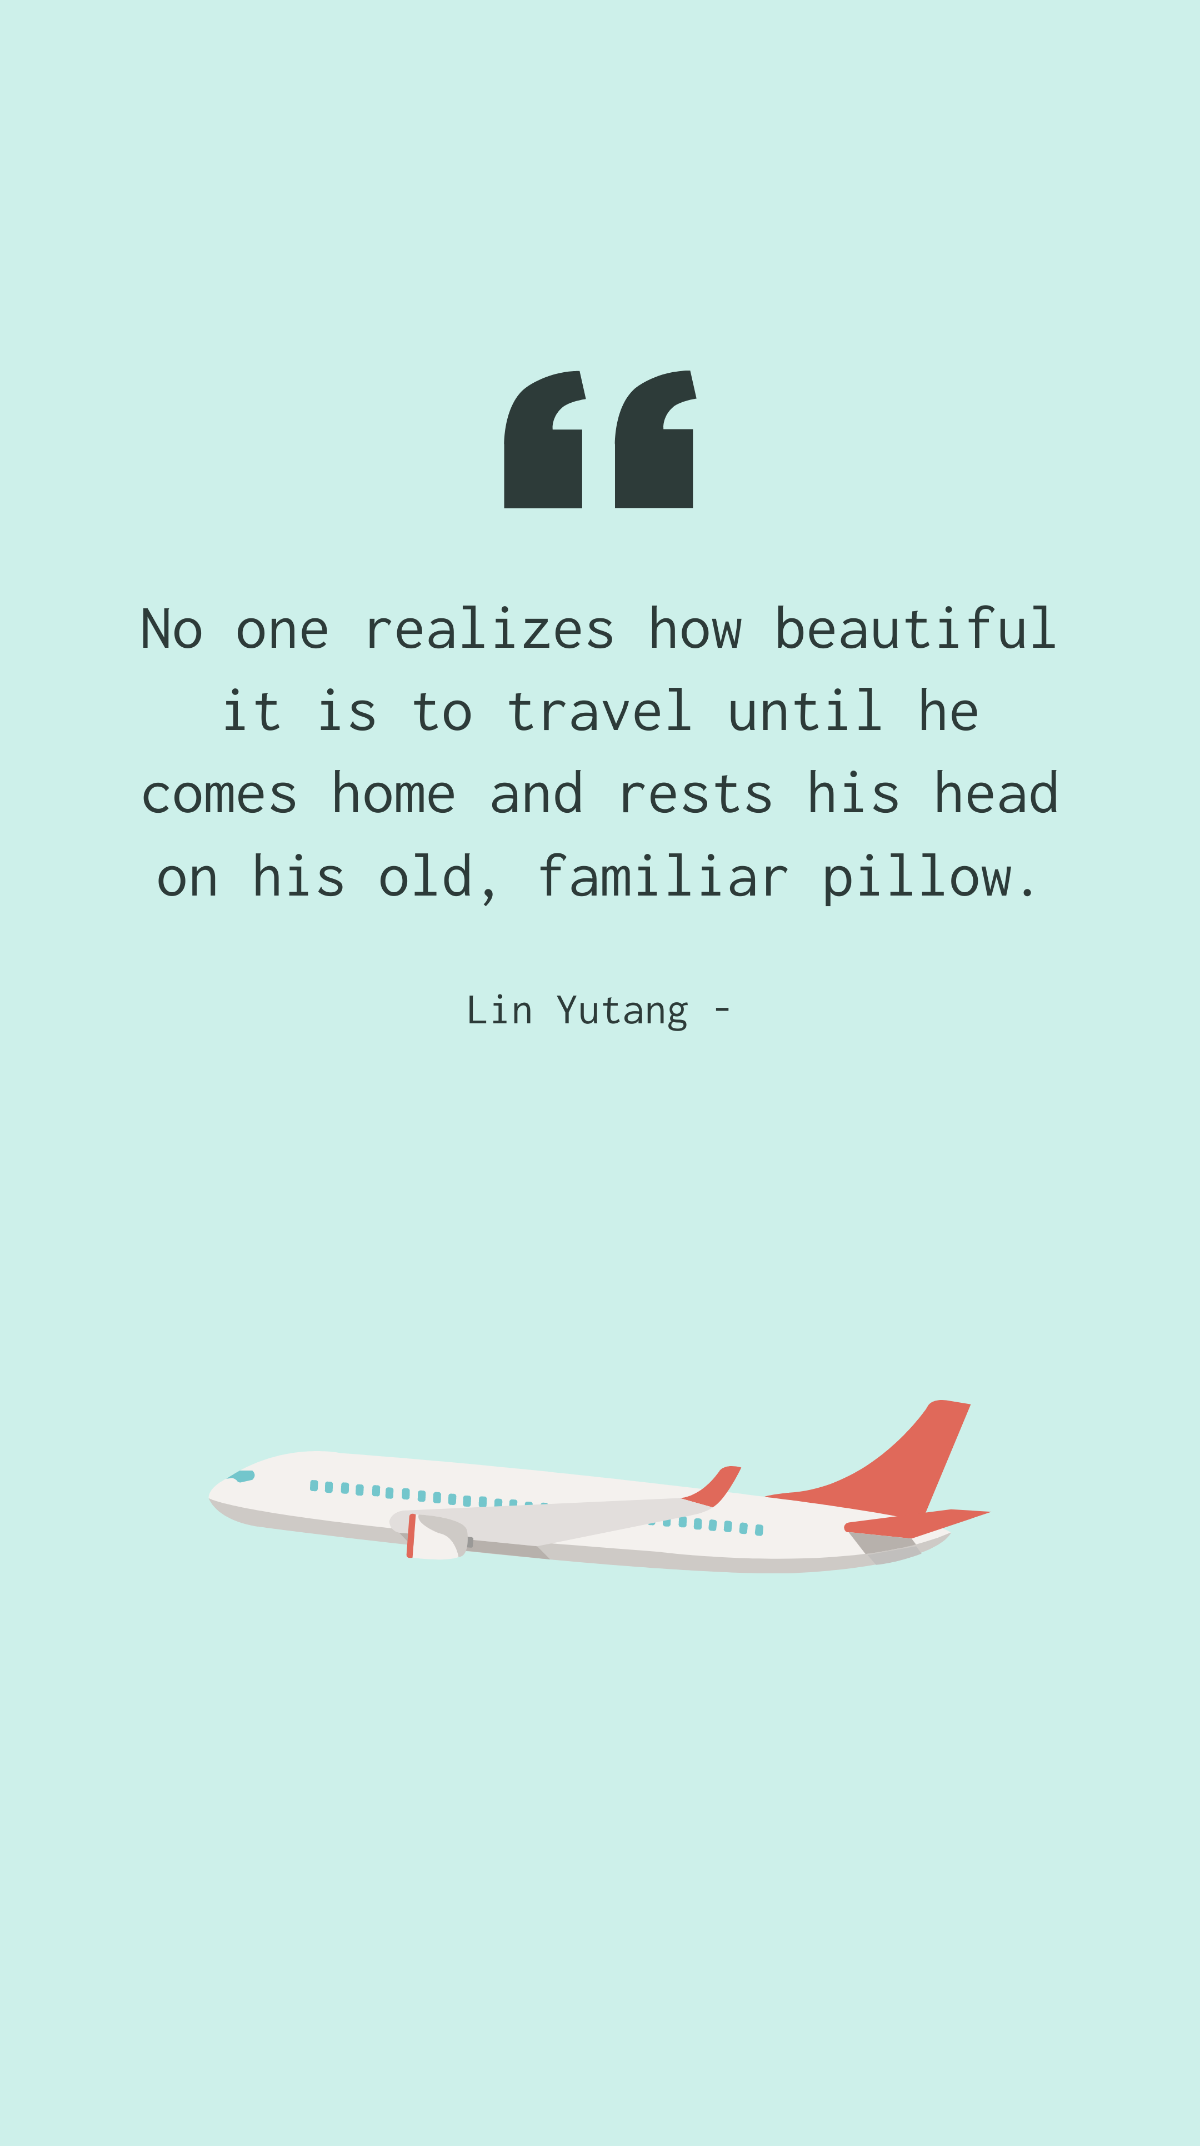 Free Lin Yutang - No one realizes how beautiful it is to travel until he comes home and rests his head on his old, familiar pillow. Template